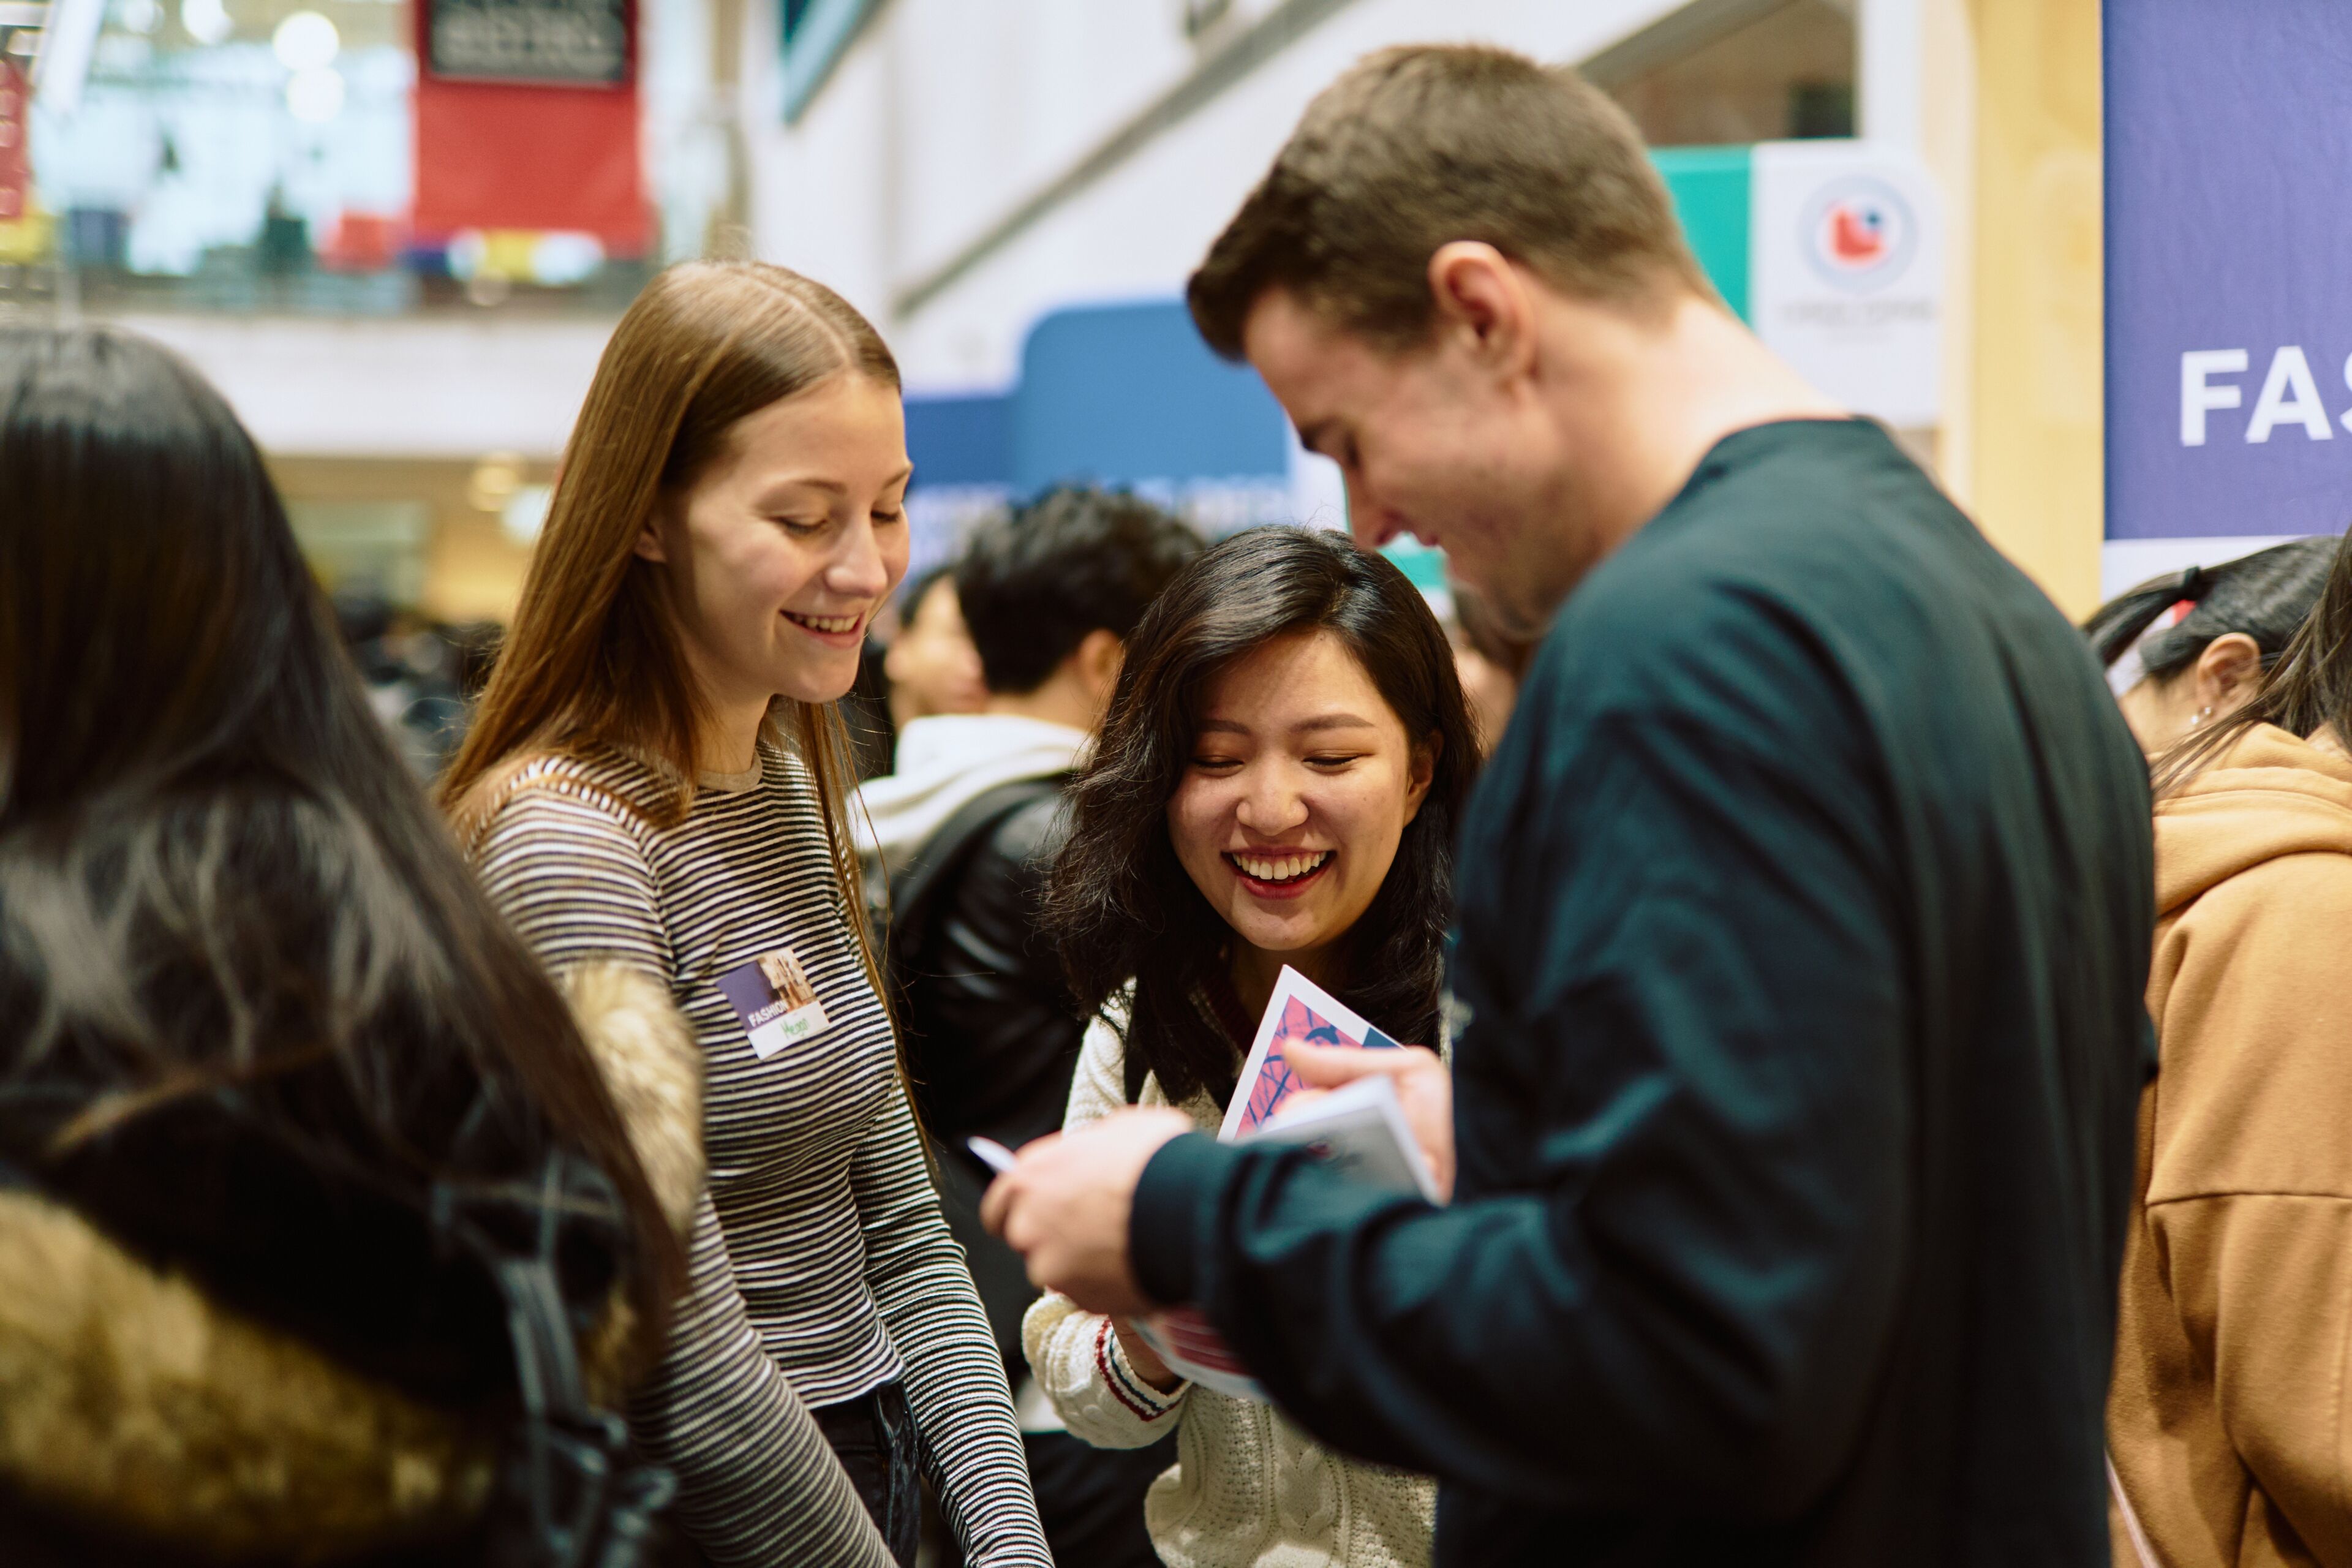 Joyful students exchange ideas and share a laugh at a college networking event.